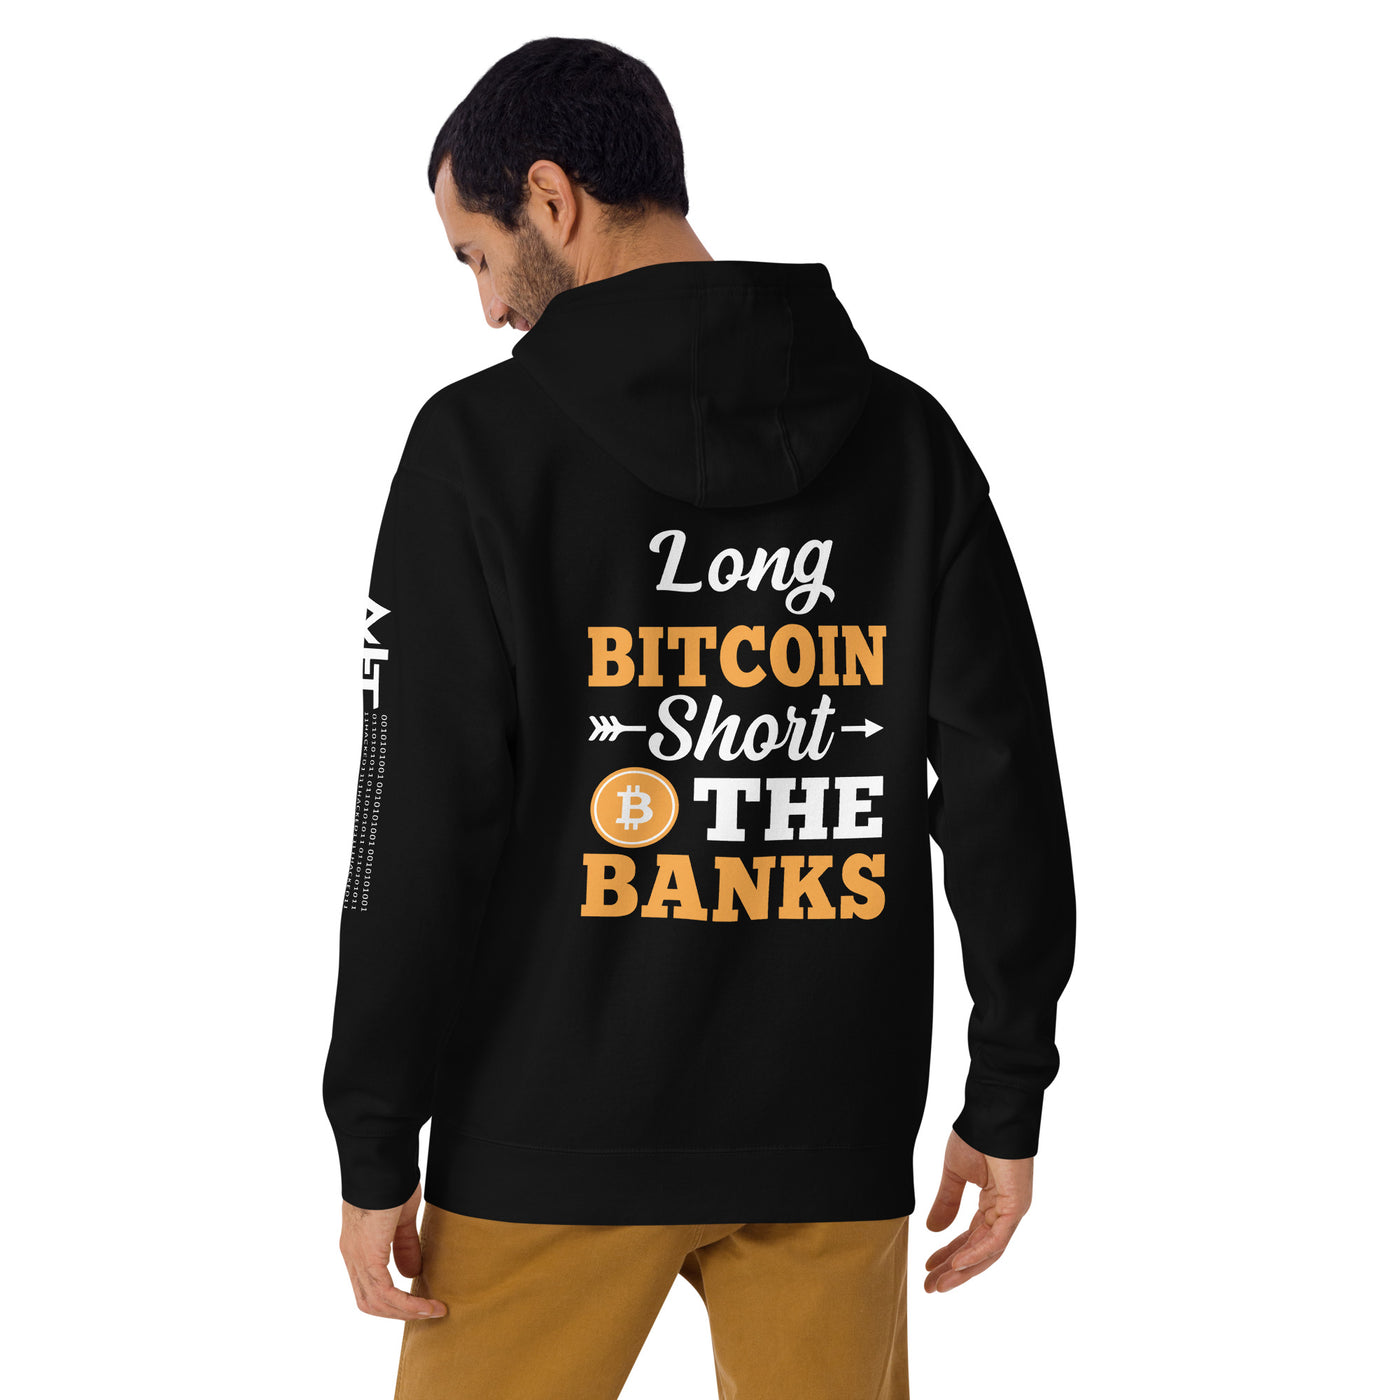 Long Big Coin, Short the Banks - Unisex Hoodie ( Back Print )